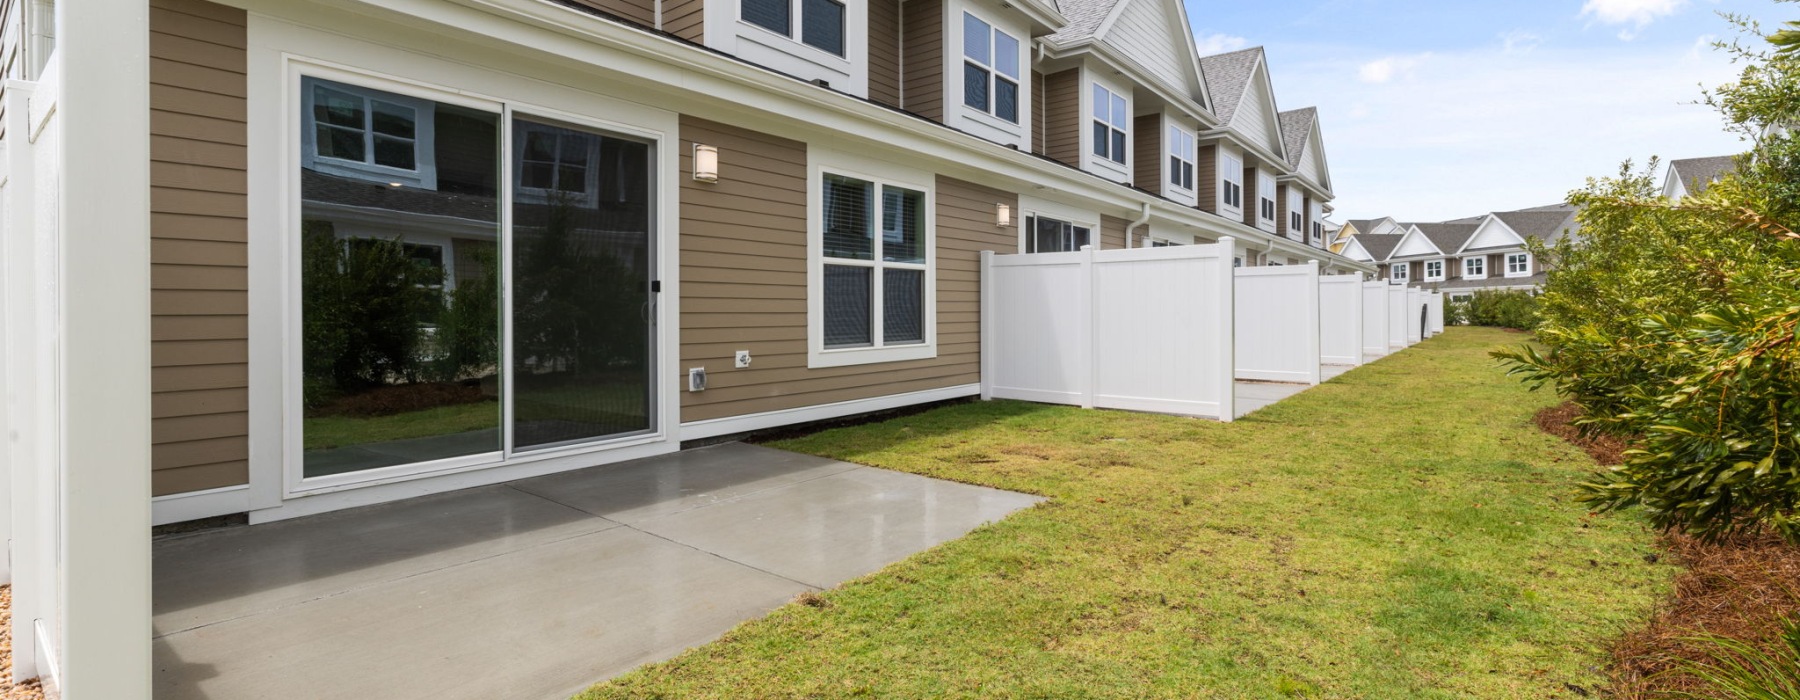 Townhomes with Private Fenced Patio 